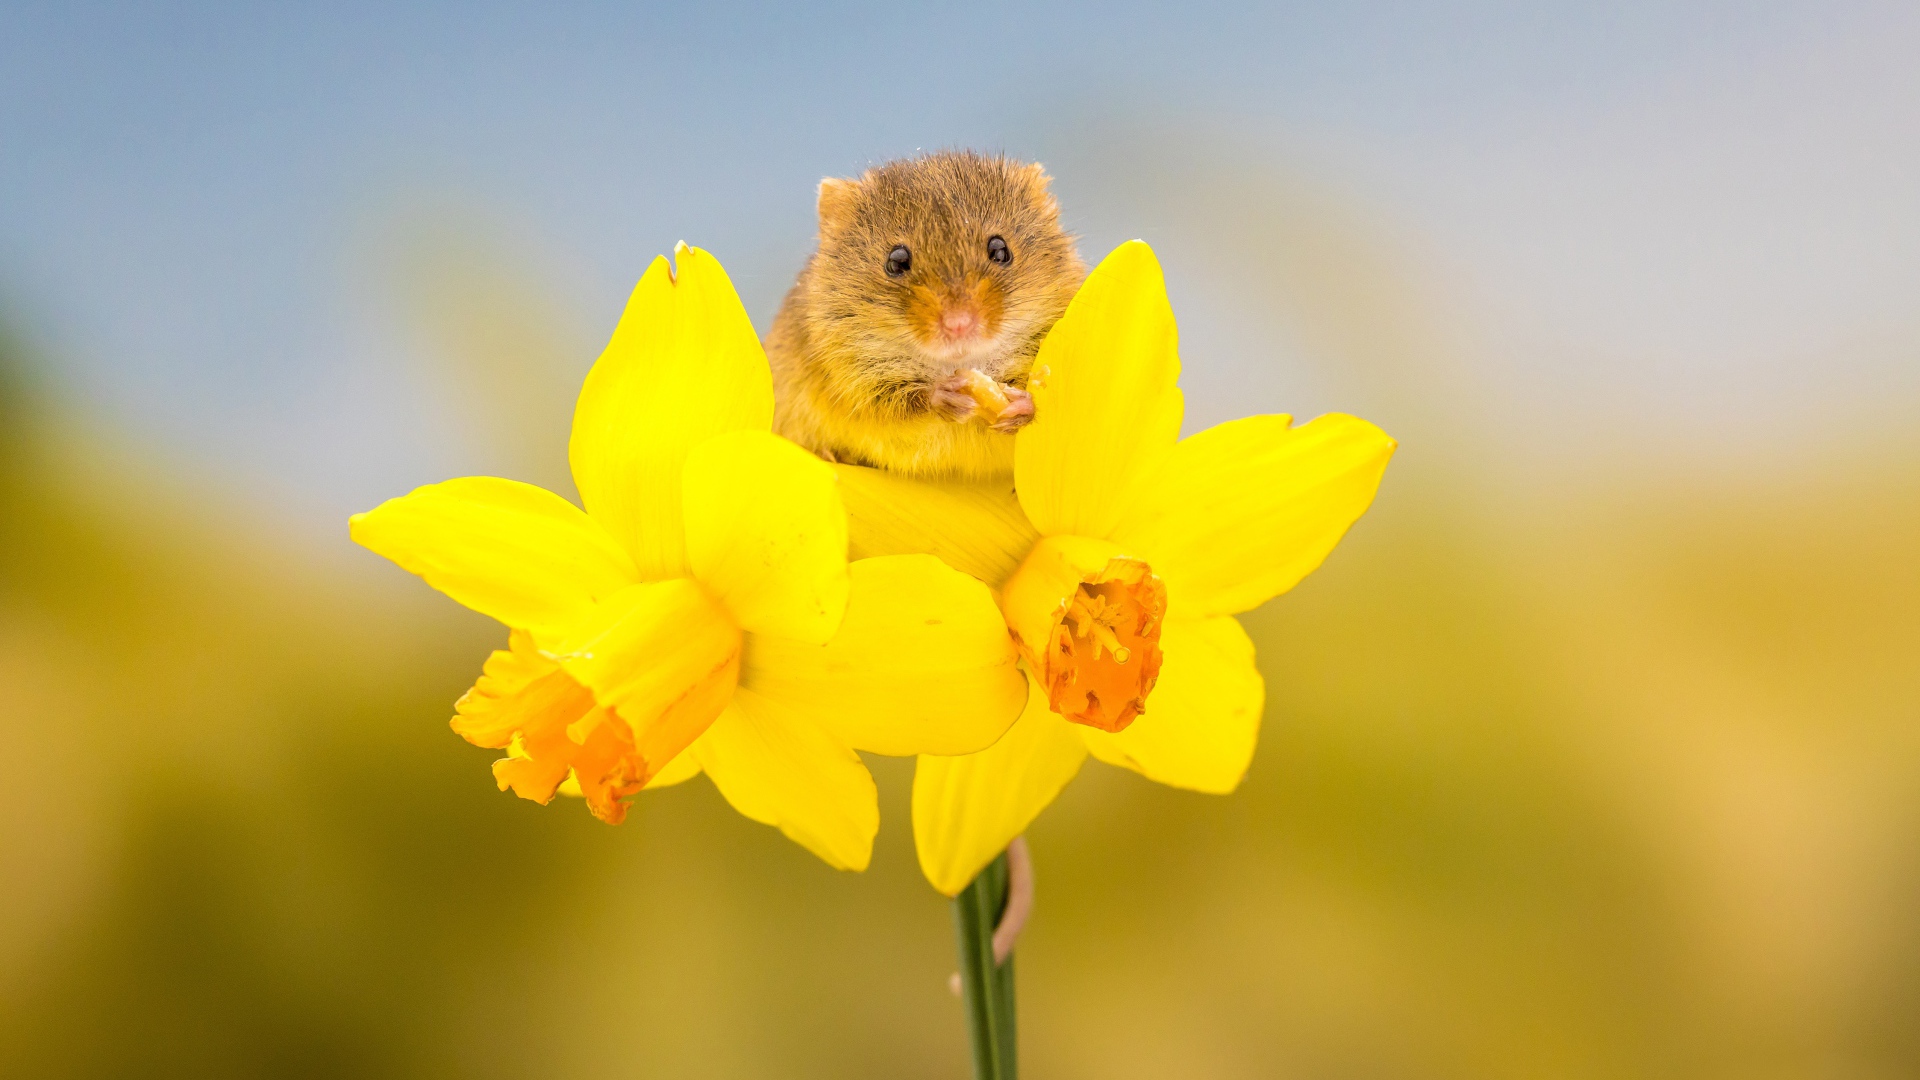 Little gray mouse on a yellow daffodil flower